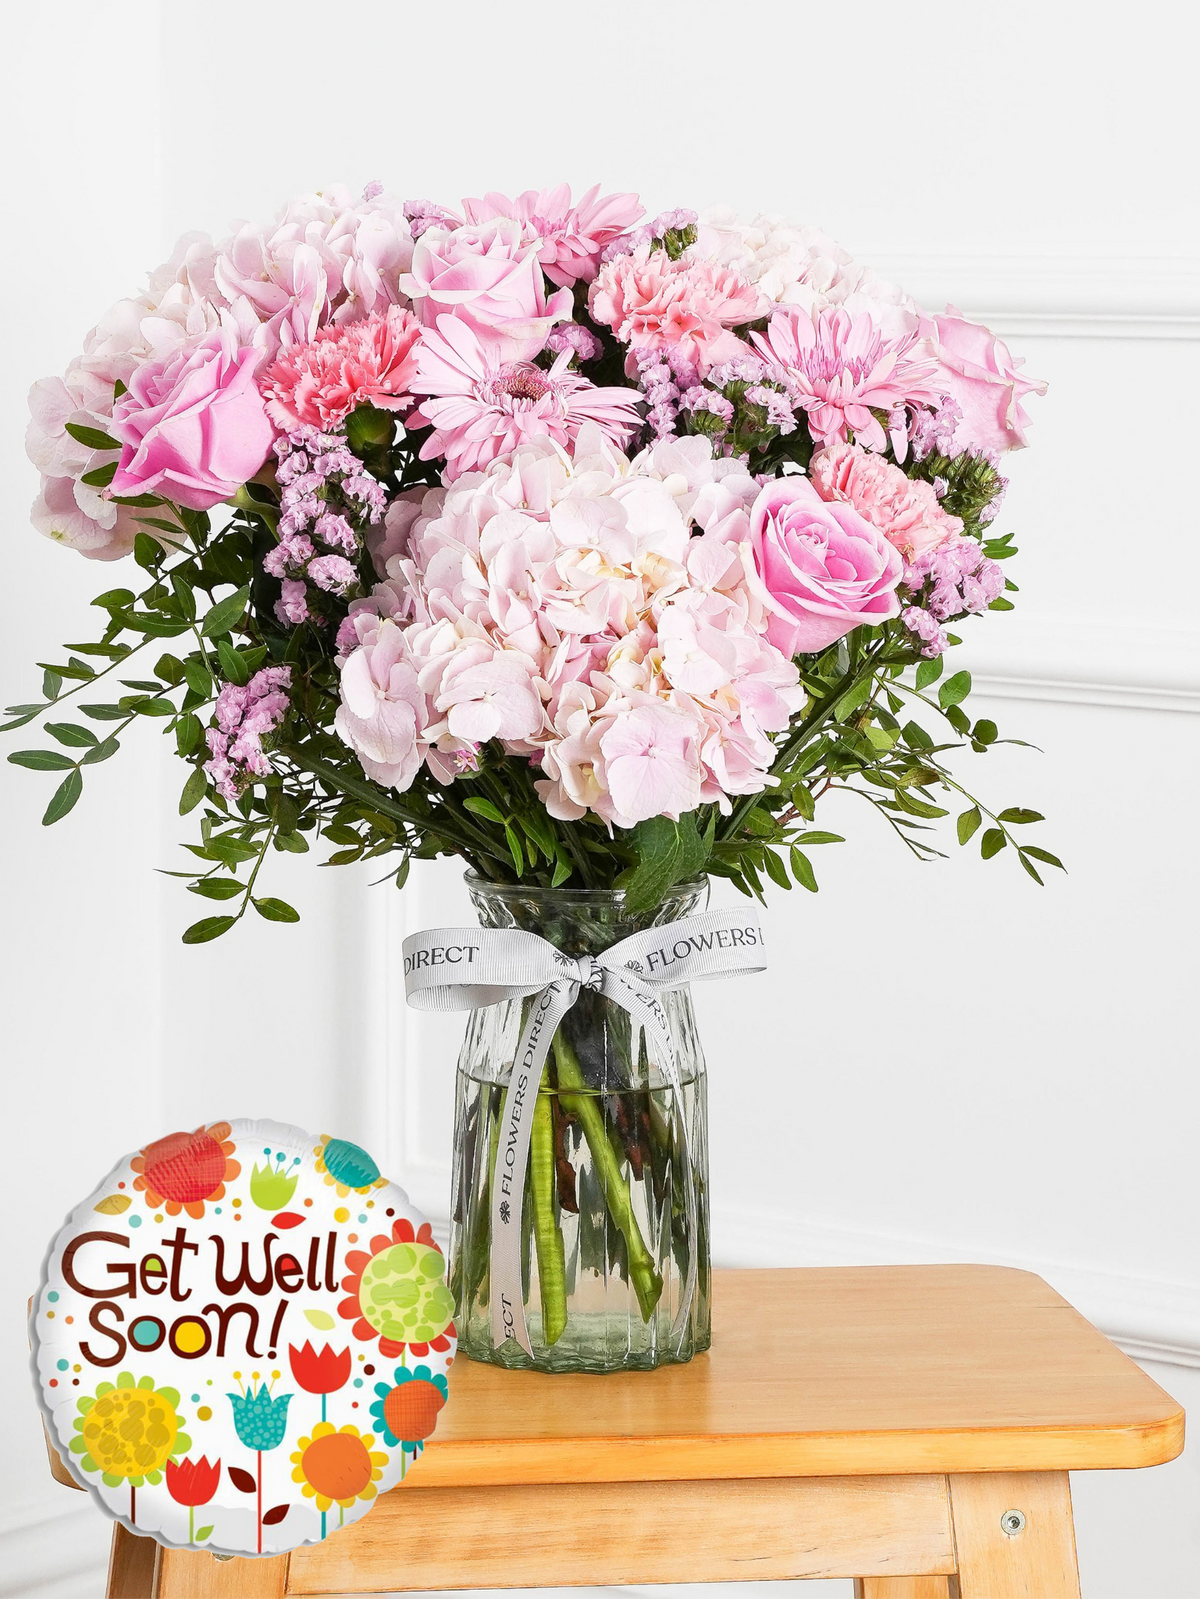 Sweetheart - Vase with Free Get Well Balloon